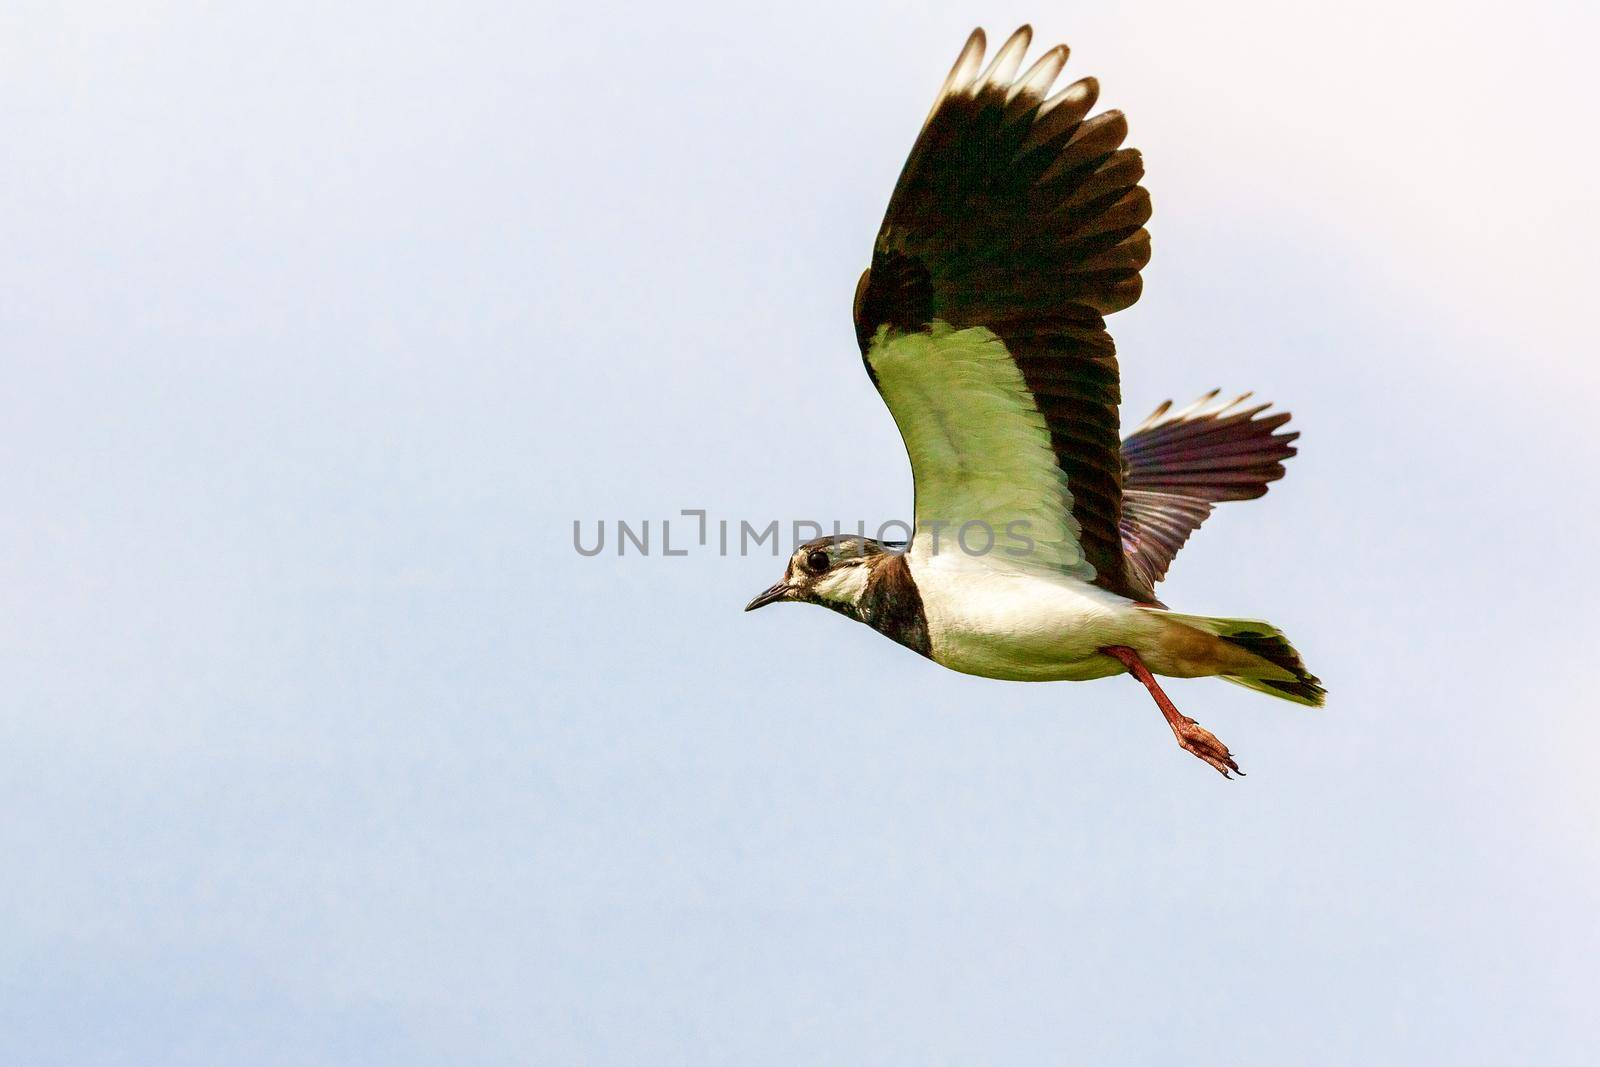 Lapwing flies against the blue sky. Russia. Moscow region. Wildlife concept.